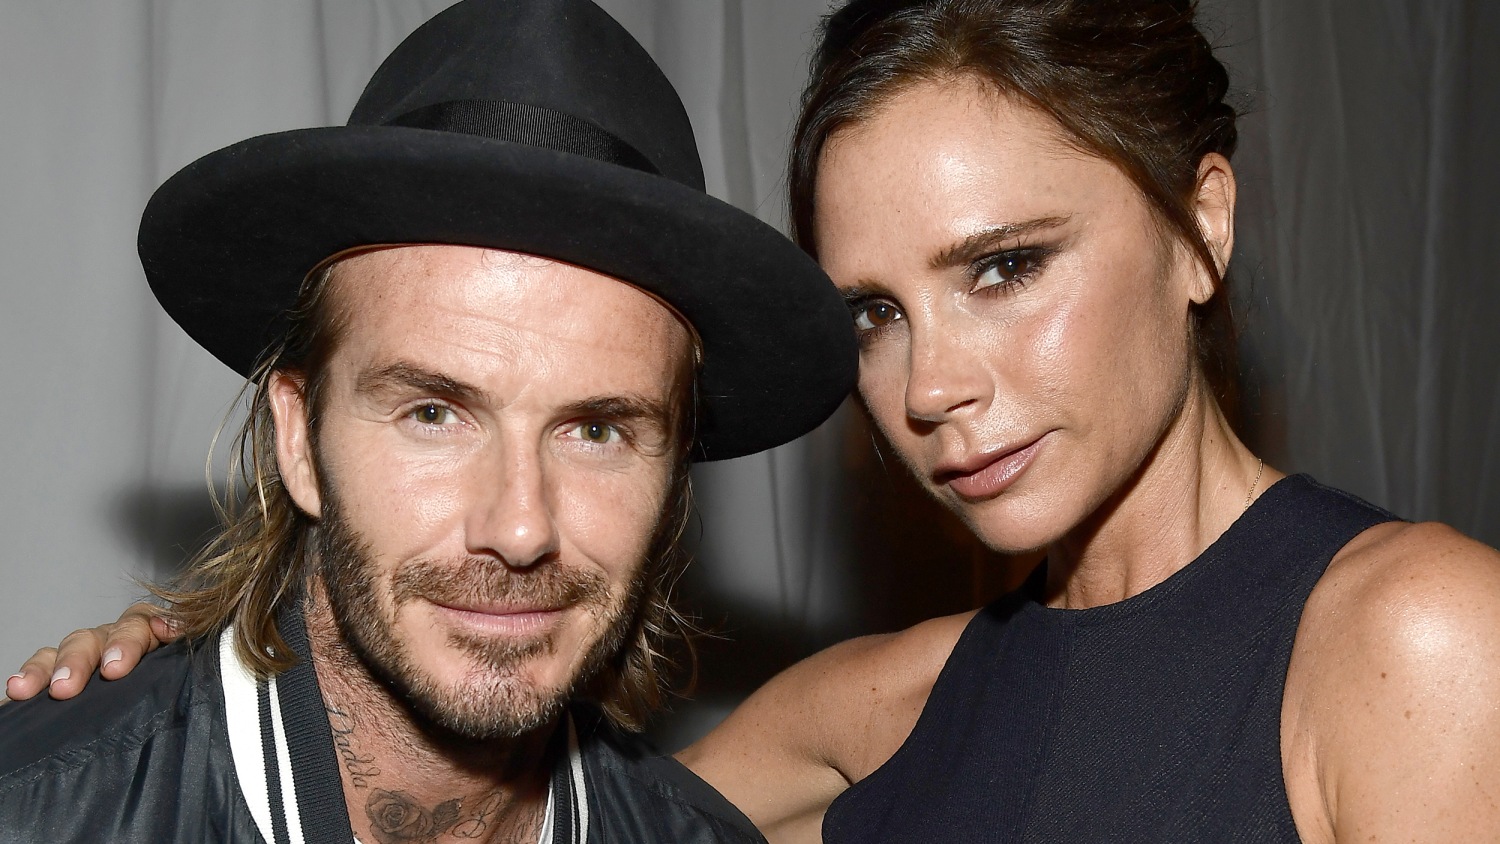 Victoria Beckham Shares Pic of David Beckham Fixing His TV in His